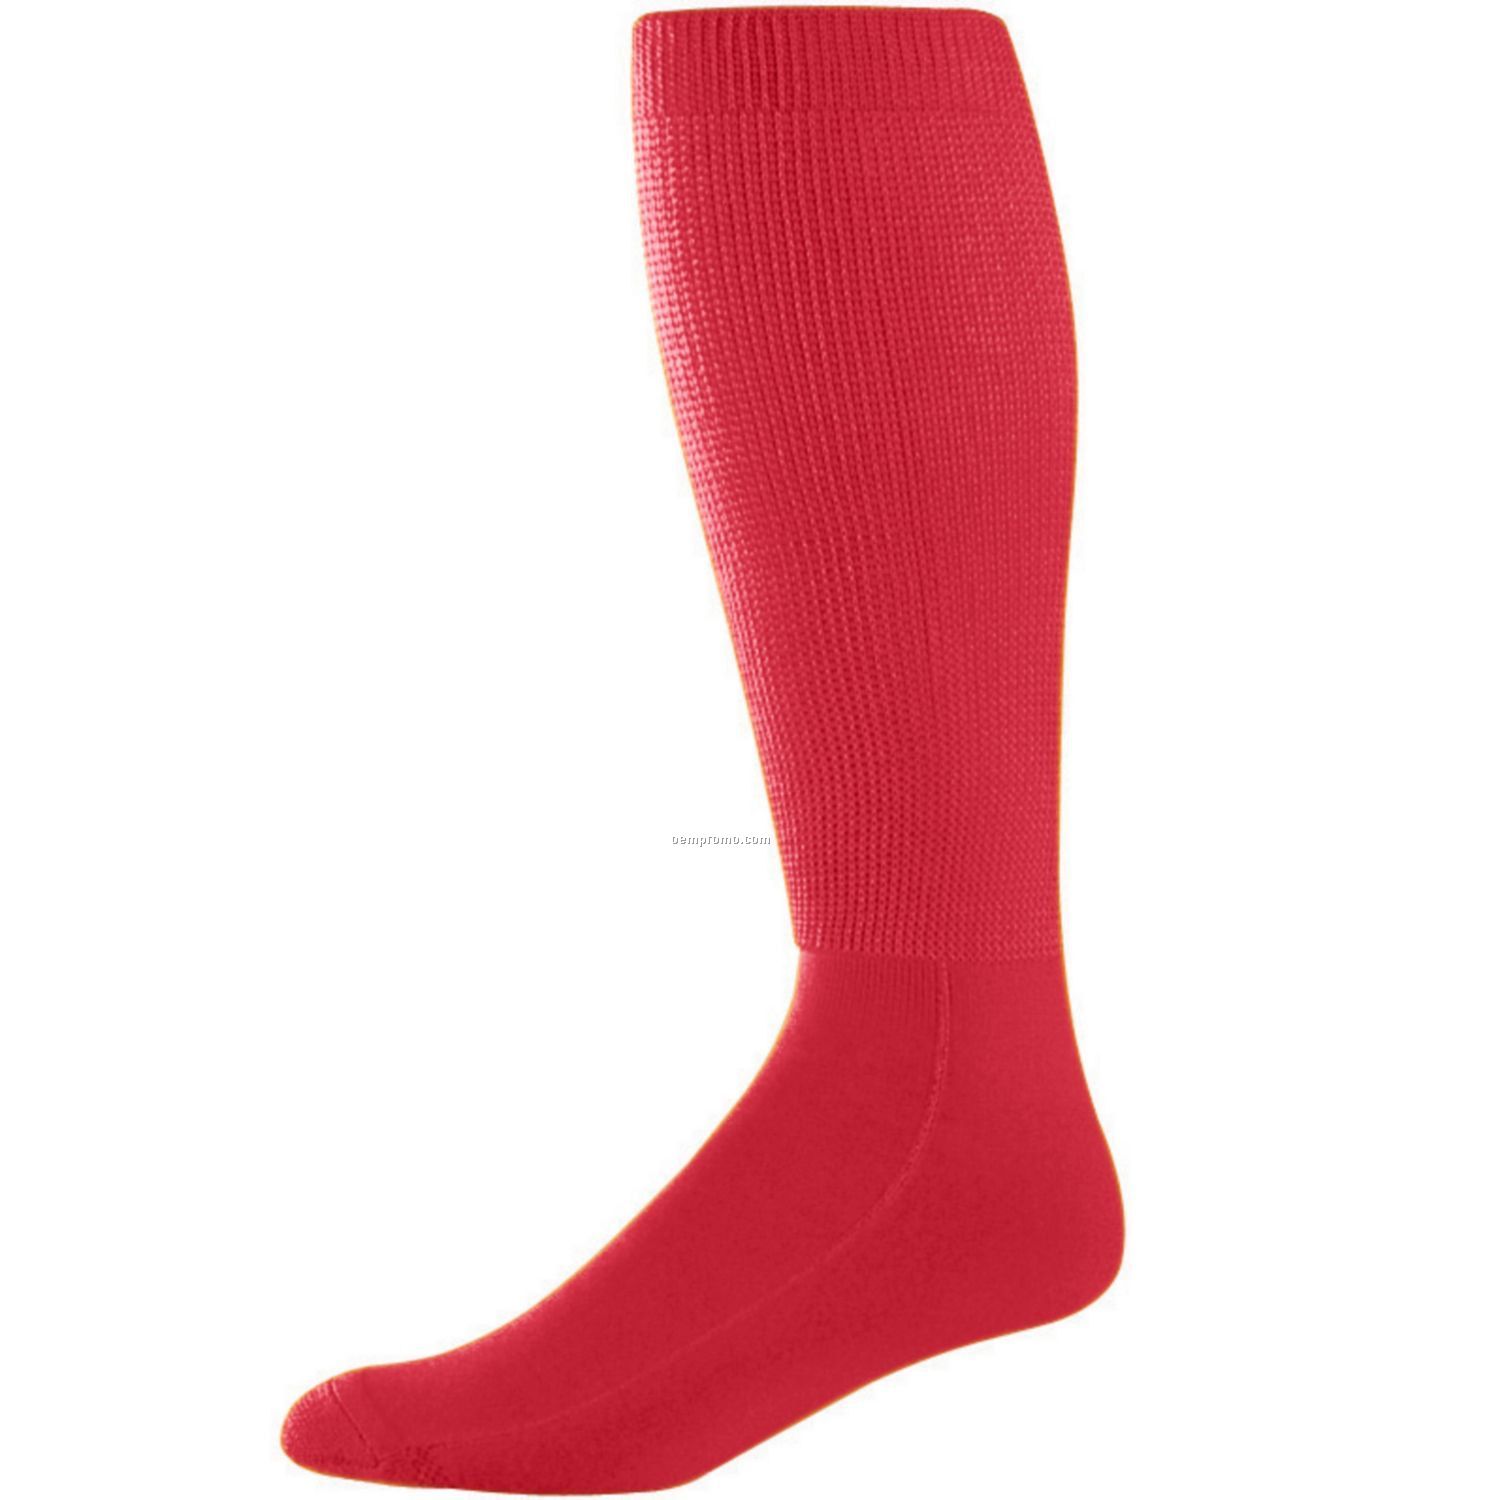 6087 Wicking Youth Athletic Soccer Socks